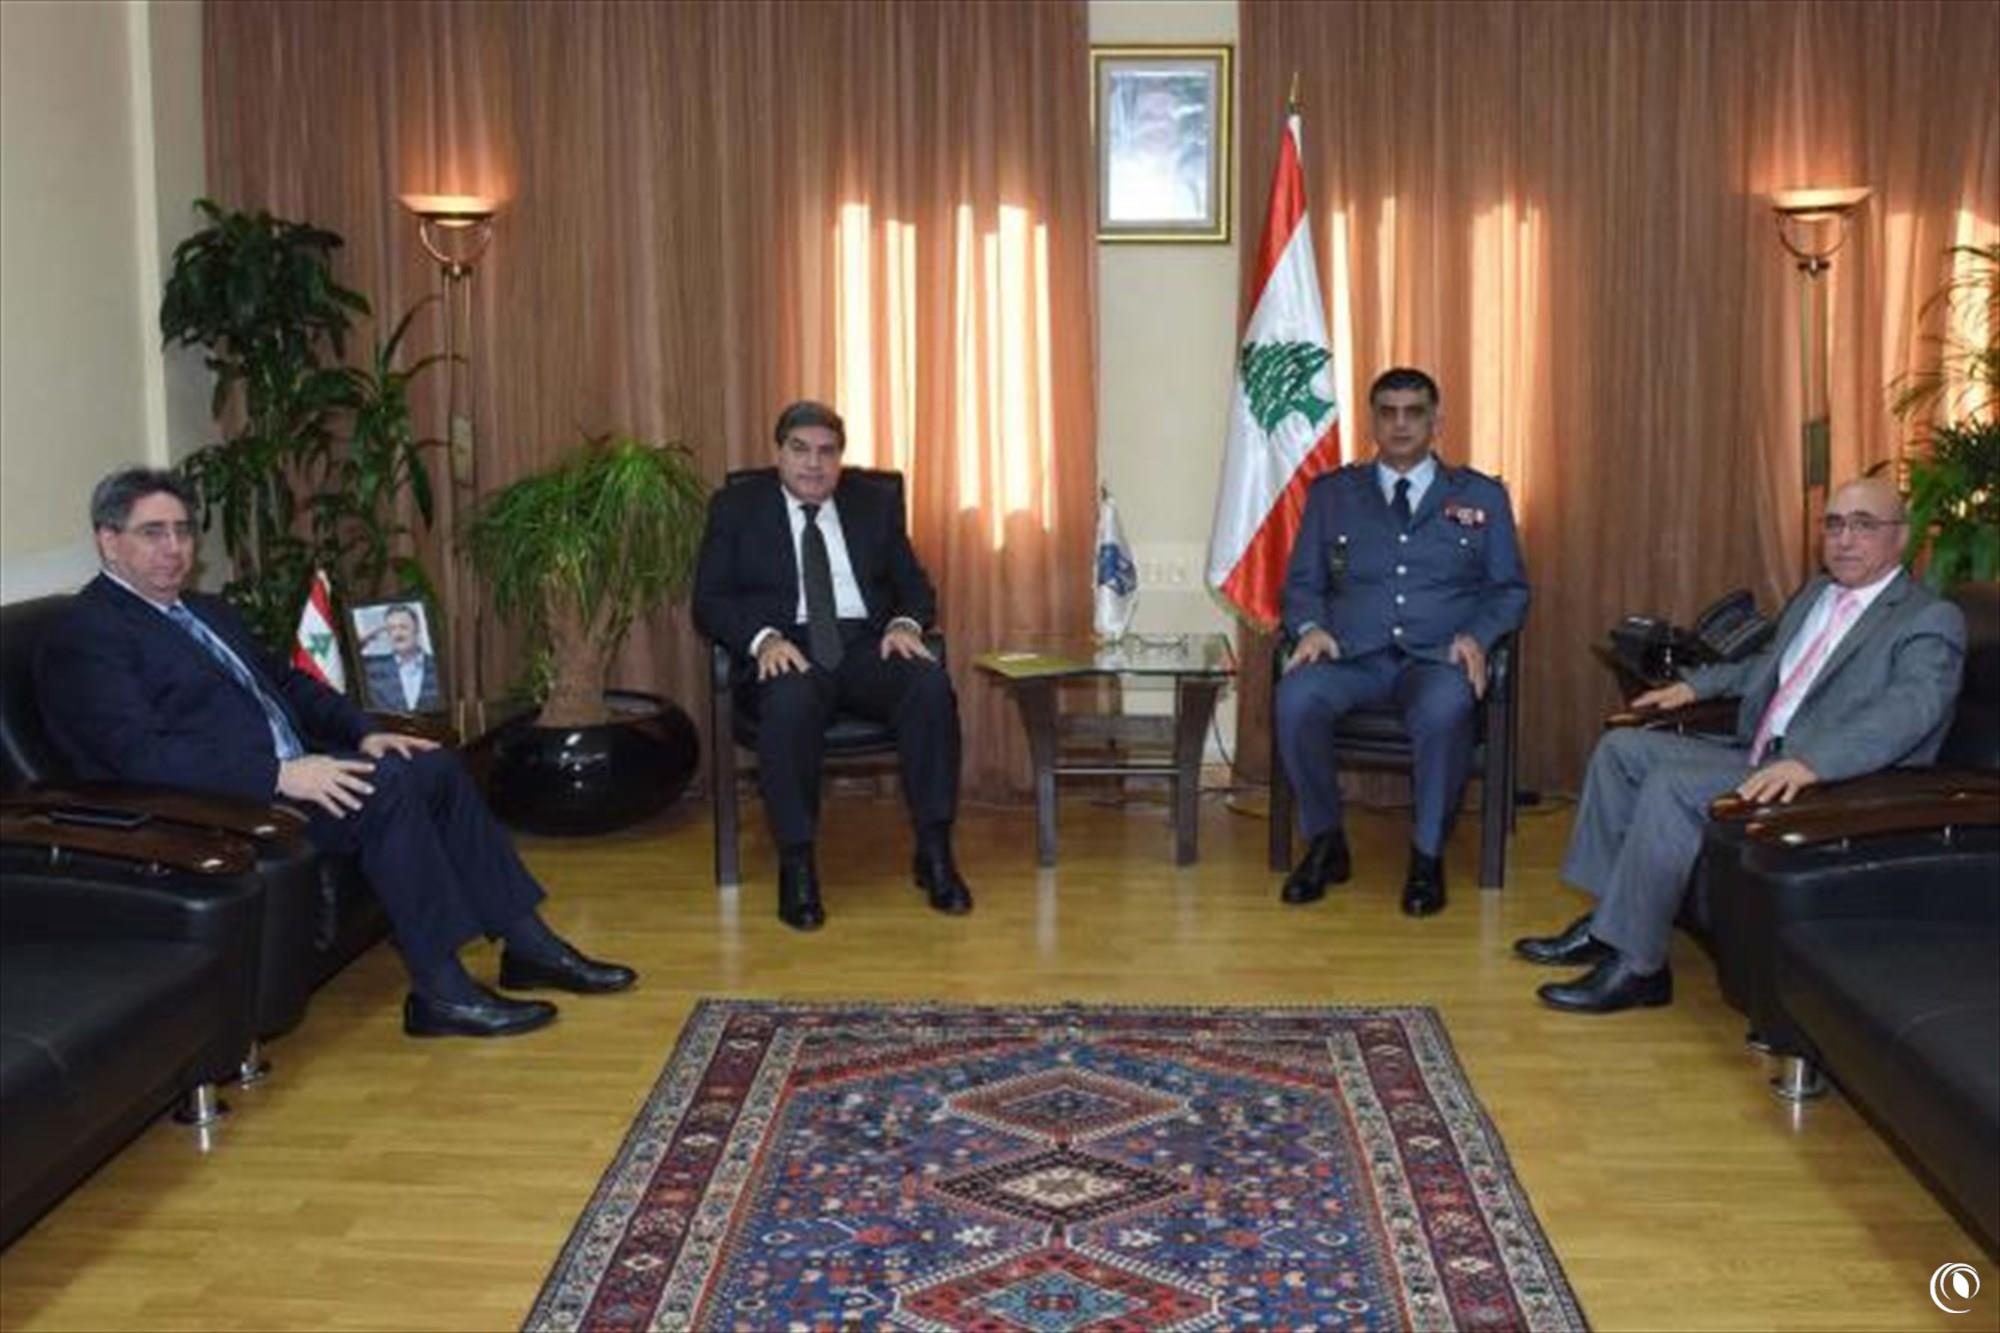 Major General Osman received the General Director of Regie at the head of a delegation